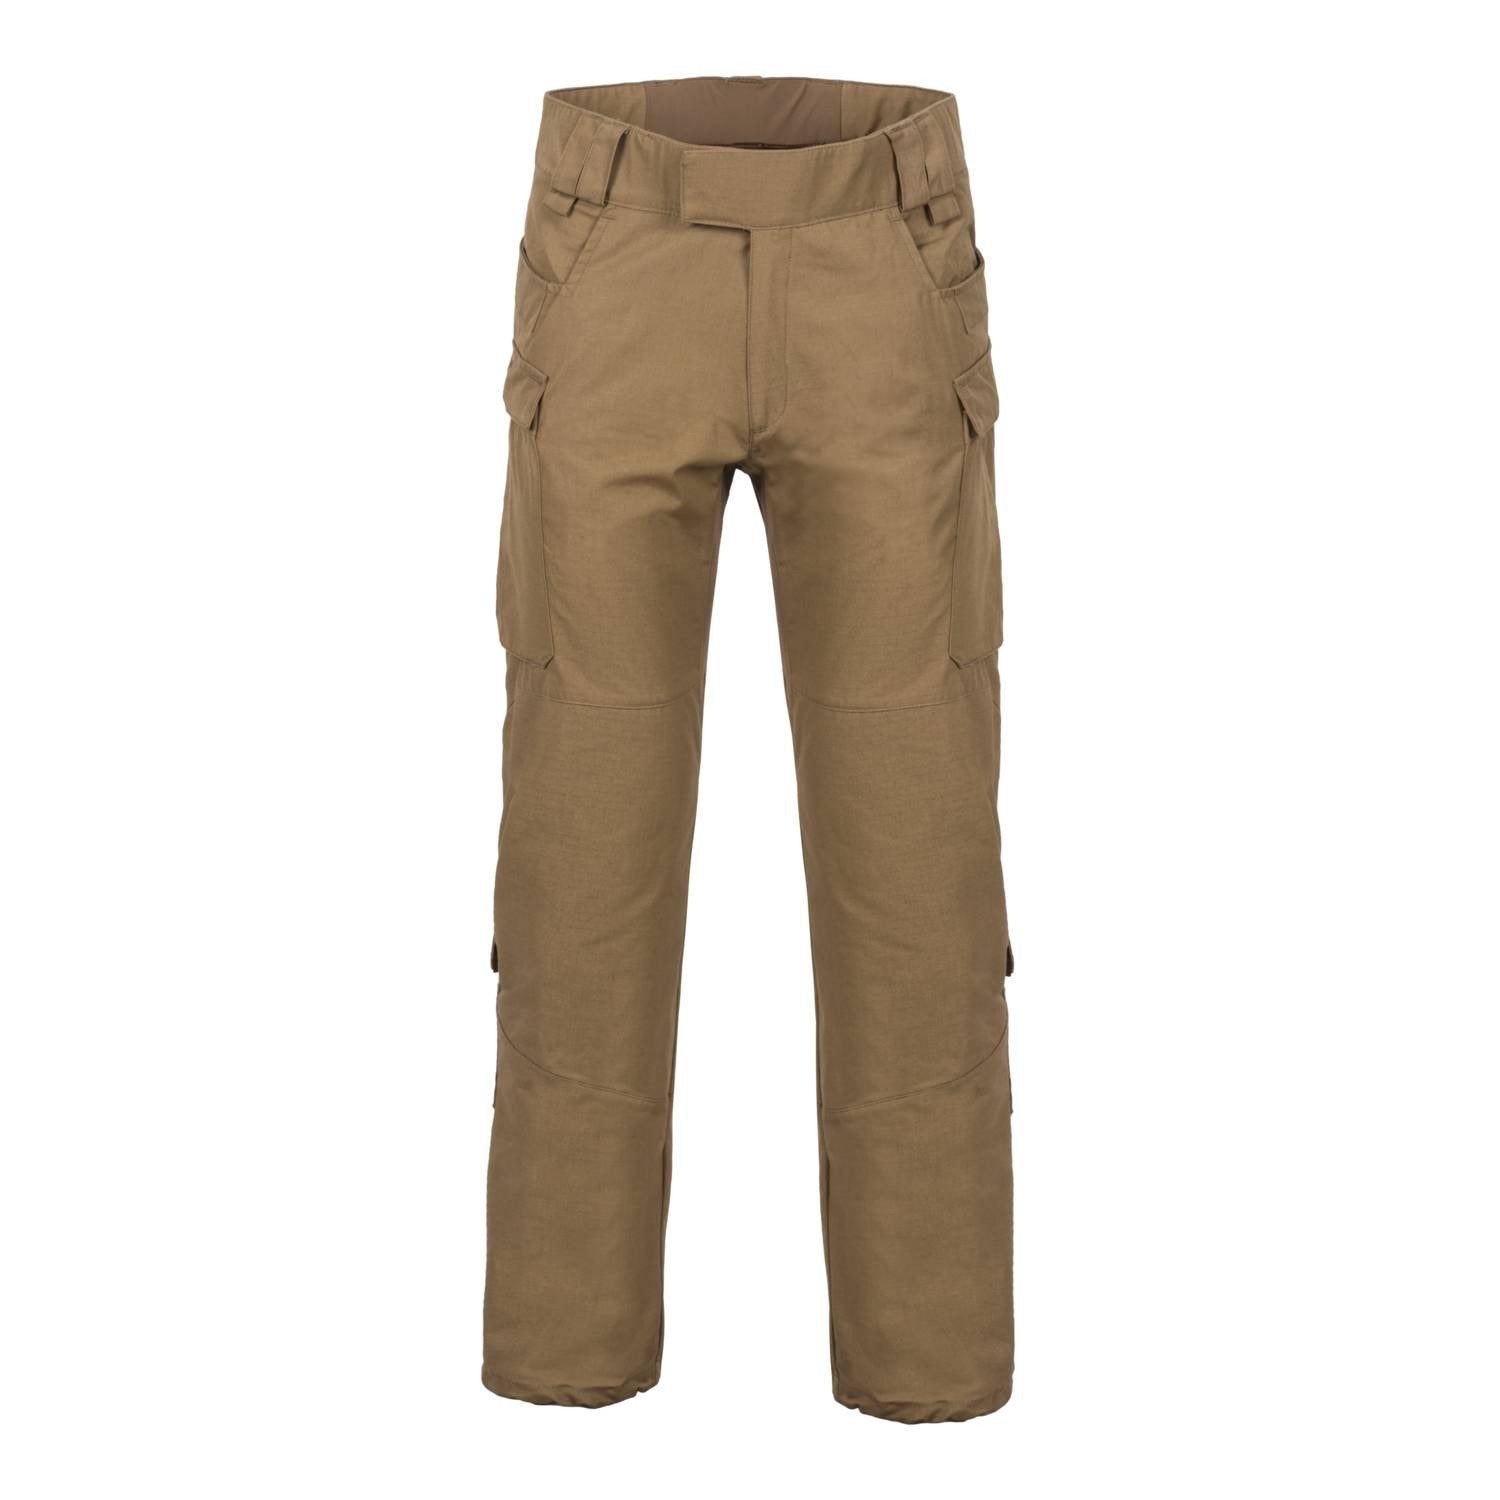 Helikon-Tex MBDU Nyco RipStop Trousers Coyote Pants Helikon-Tex Extra Small - Regular Tactical Gear Supplier Tactical Distributors Australia